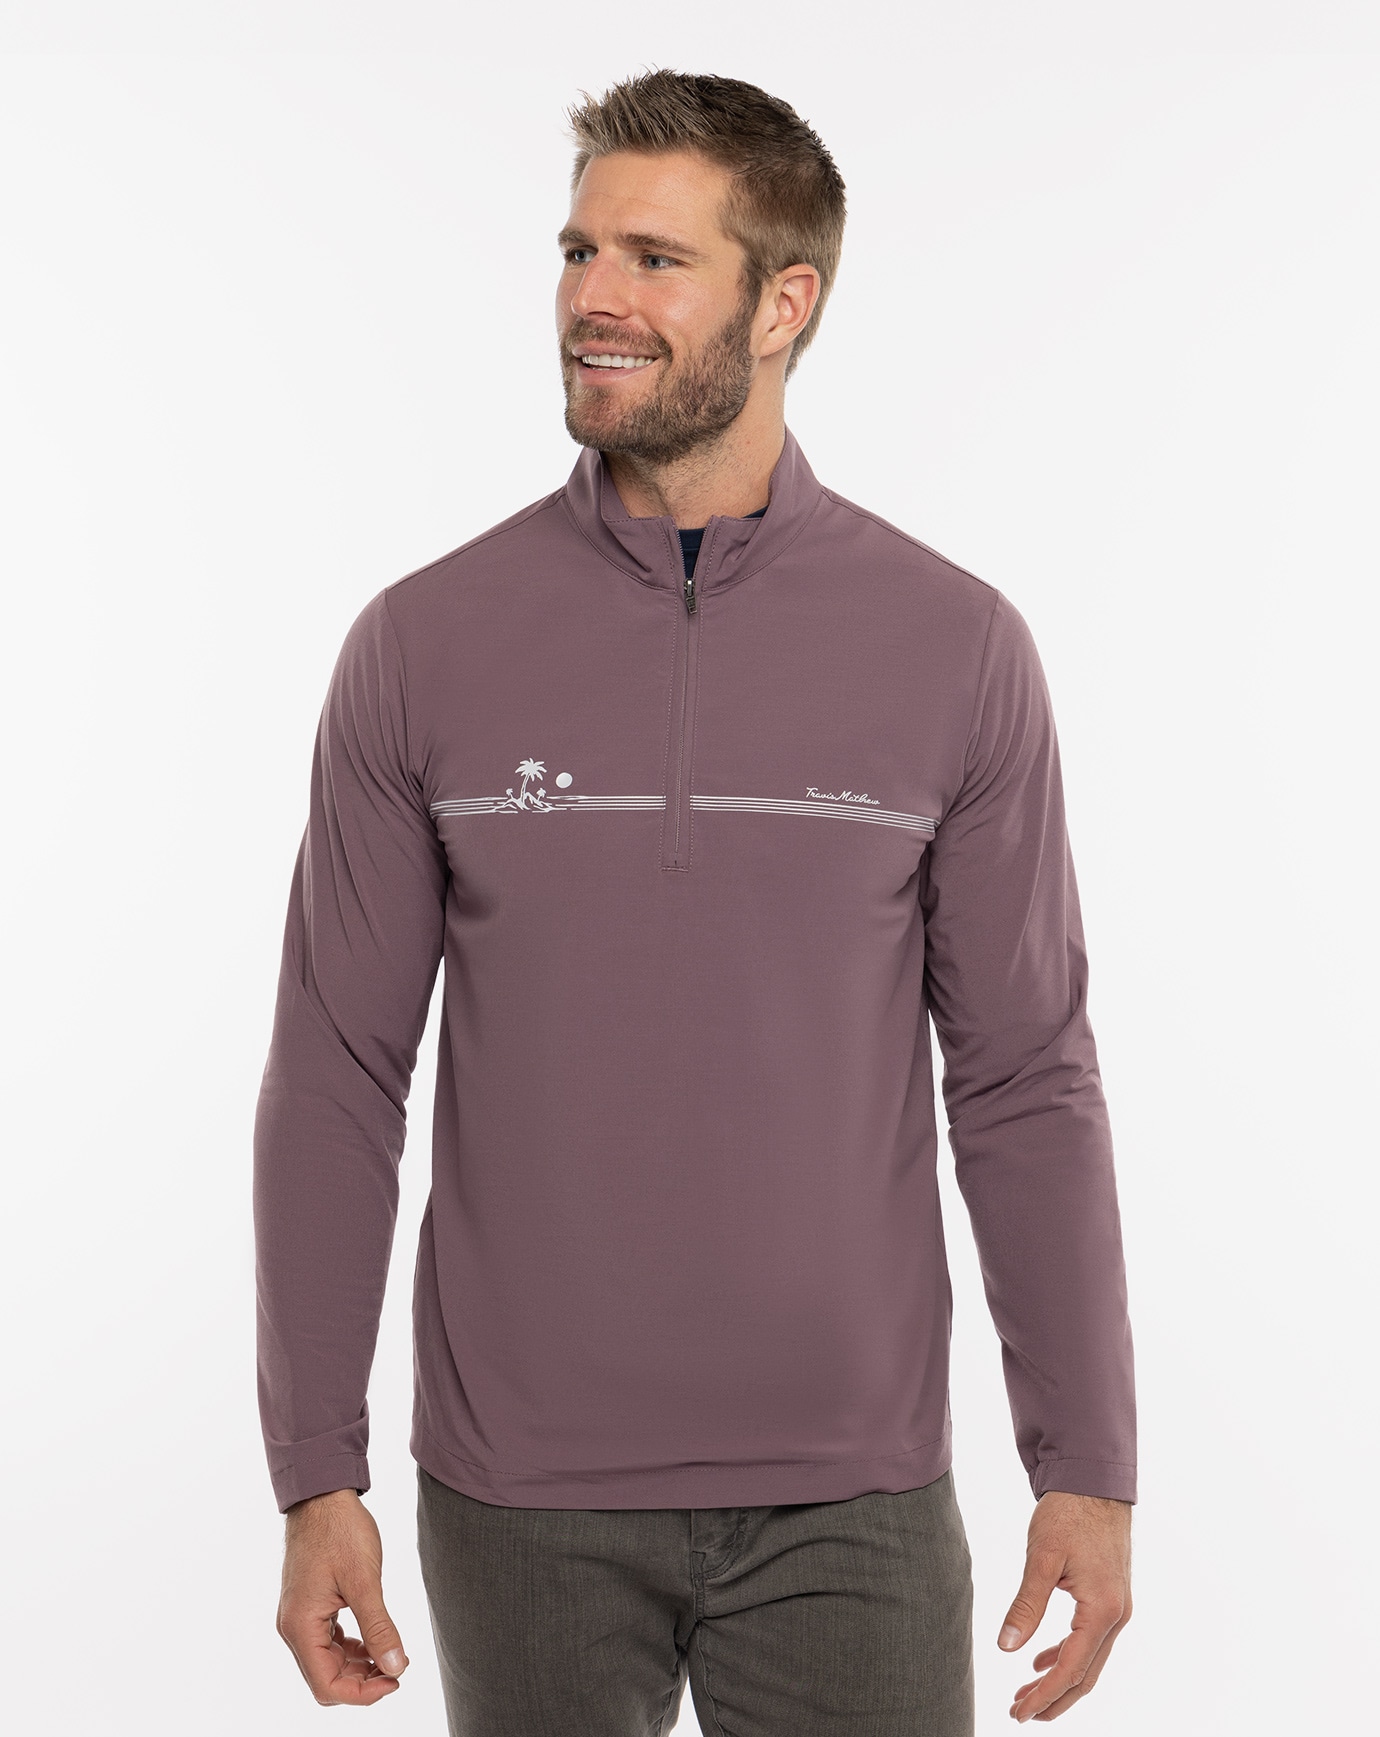 Related Product - UNEXPECTED SURPRISE QUARTER ZIP